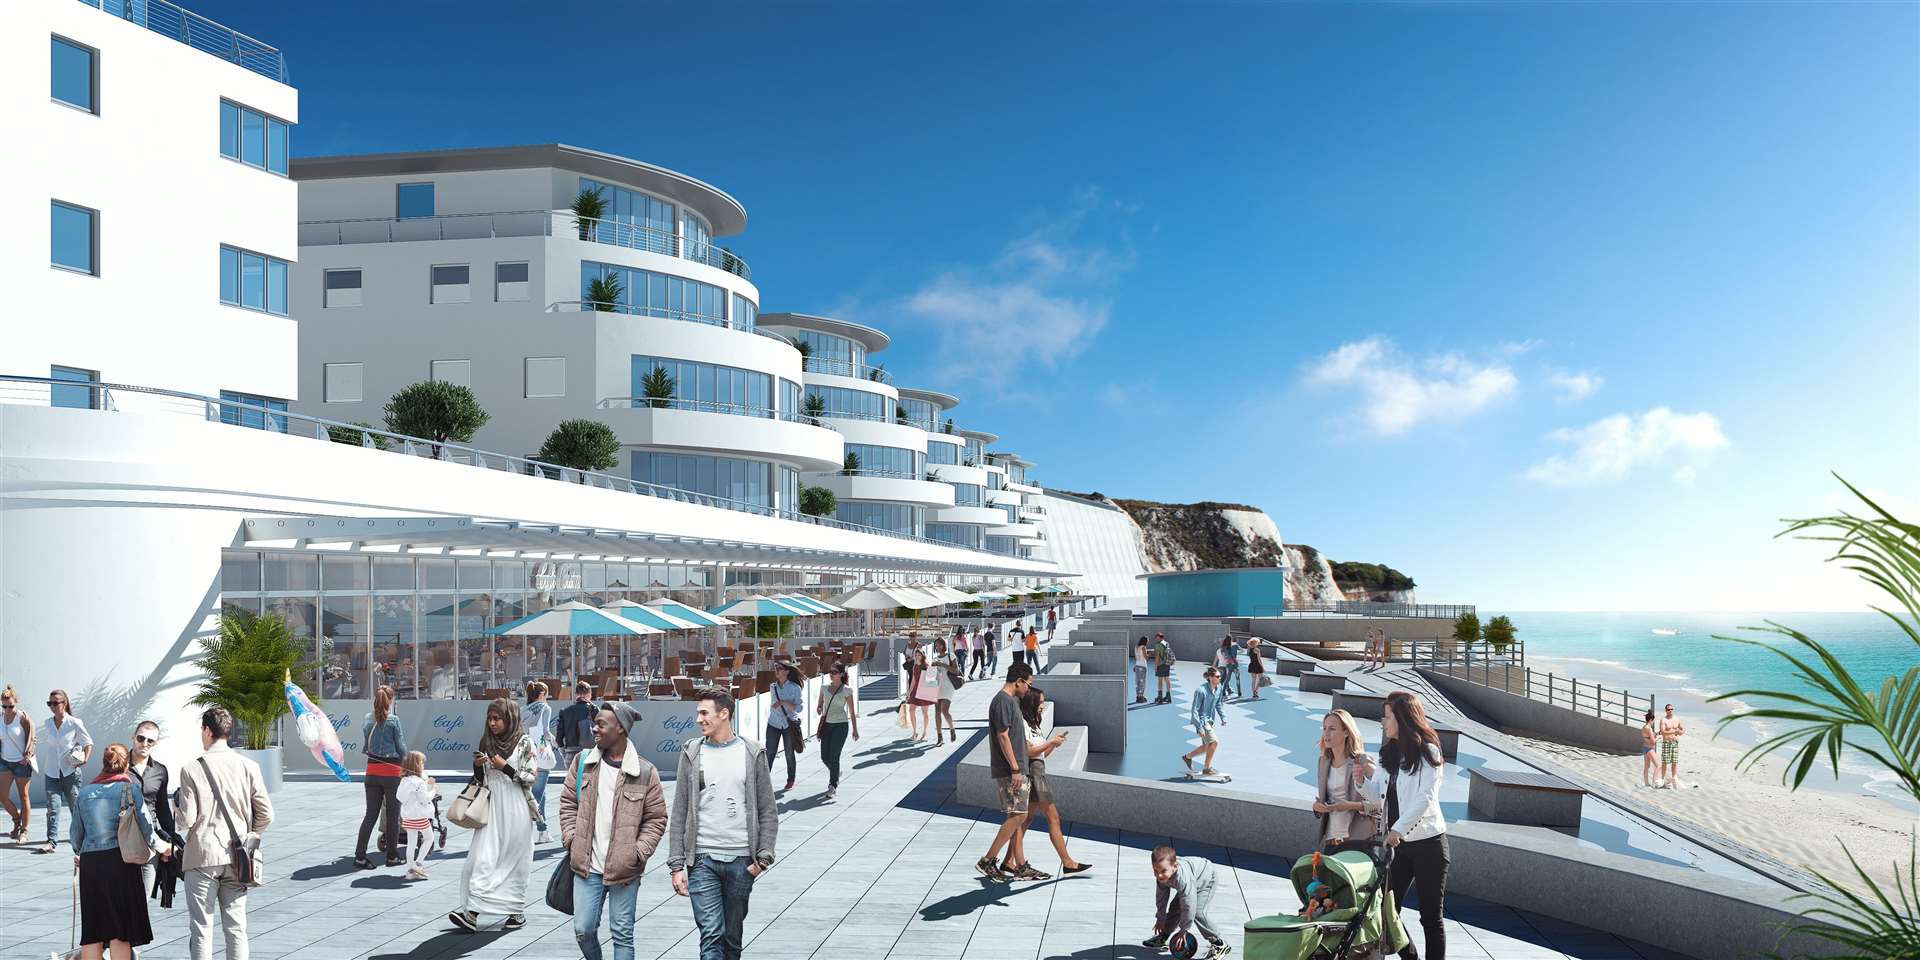 The Royal Sands beachfront complex which is currently under construction